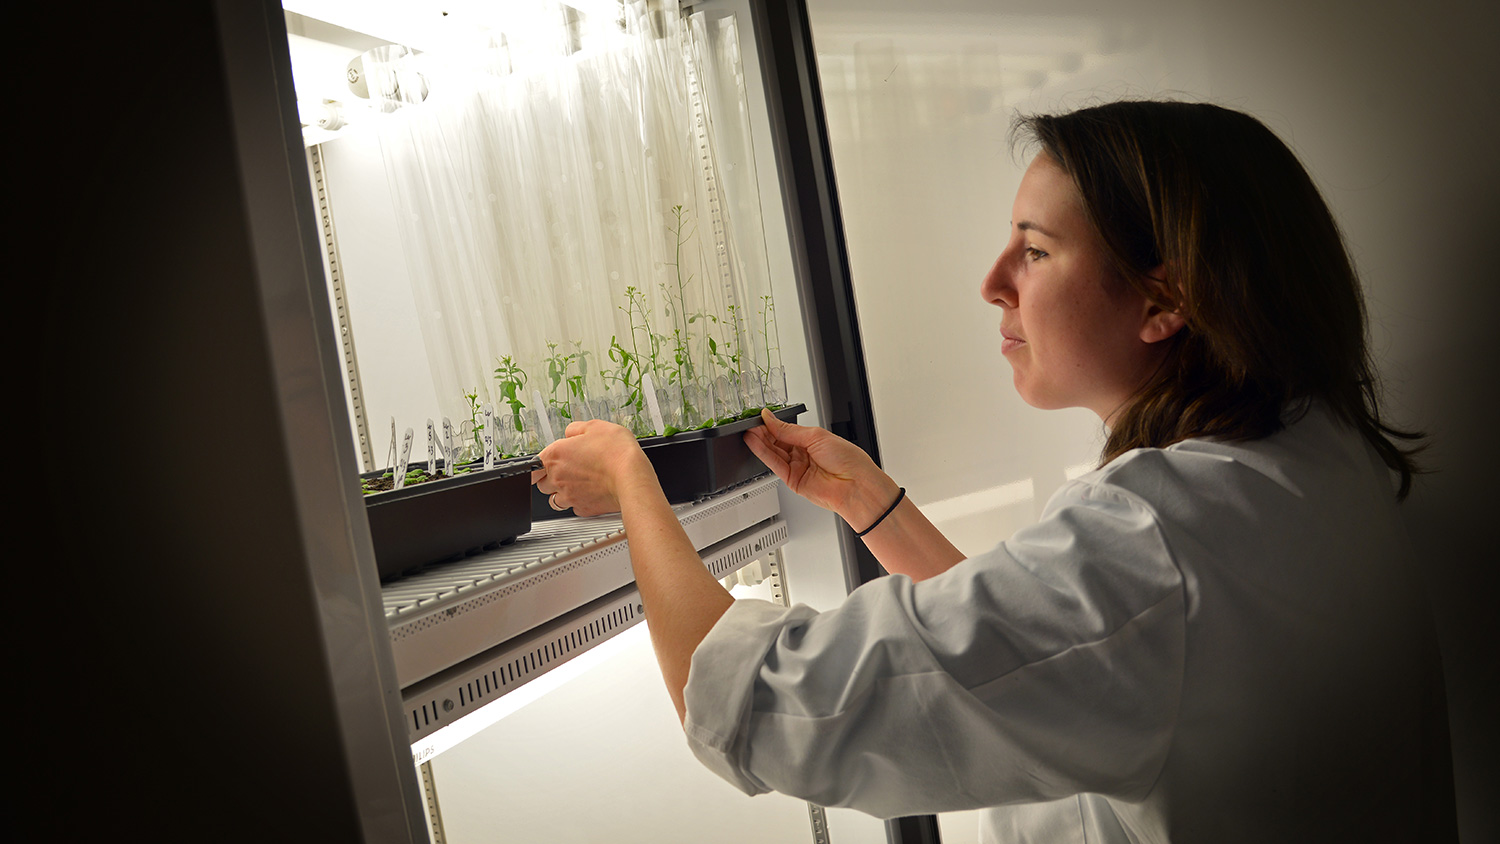 Researcher checking plant growth